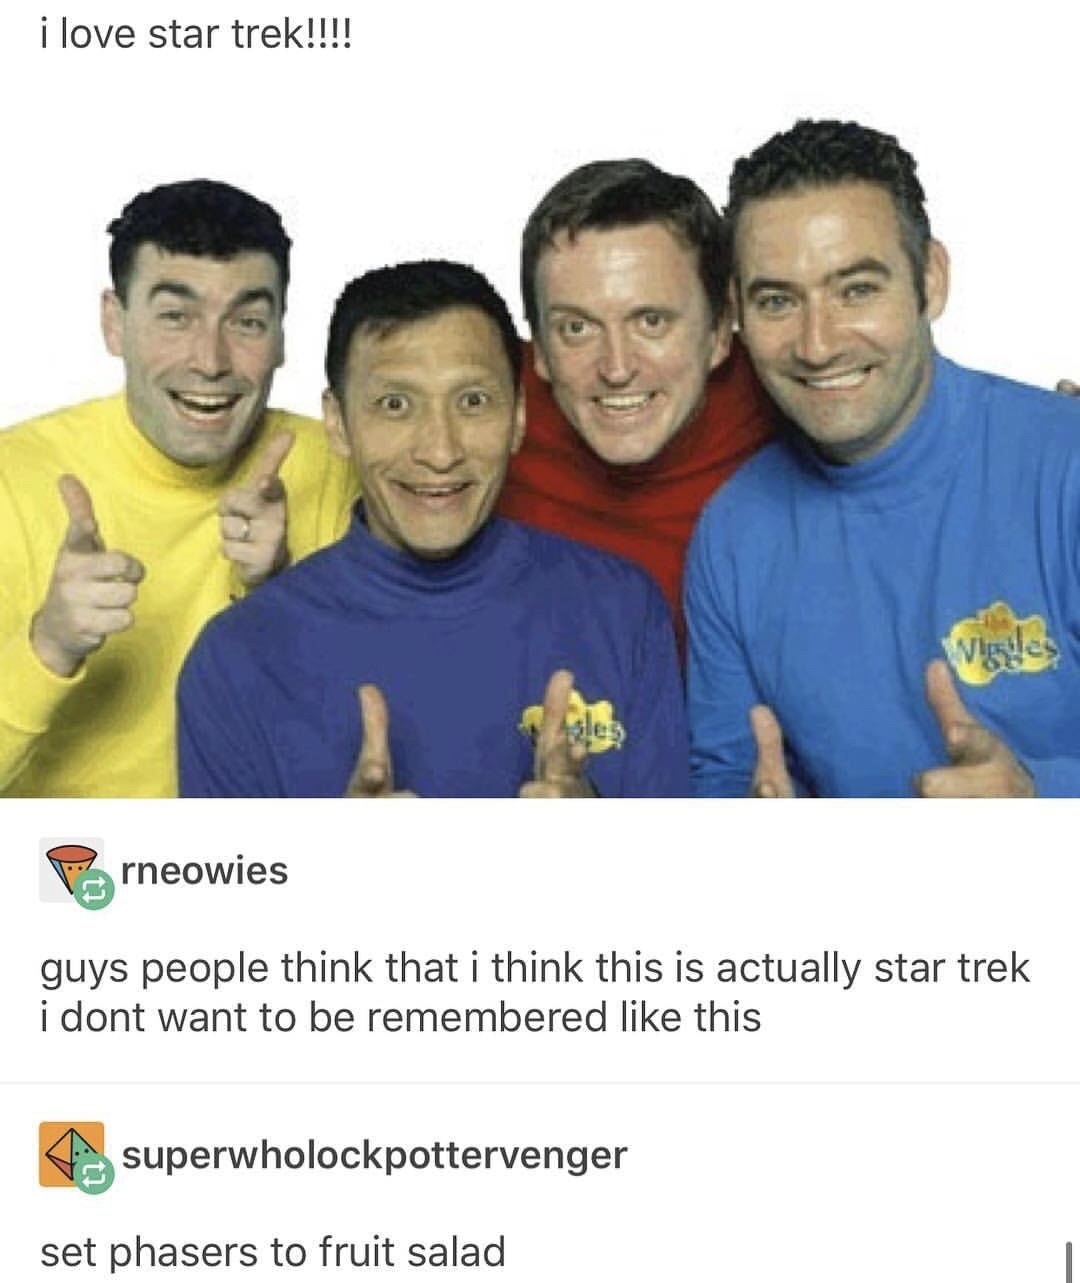 memes - original wiggles - i love star trek!!!! Prneowies guys people think that i think this is actually star trek i dont want to be remembered this superwholockpottervenger set phasers to fruit salad